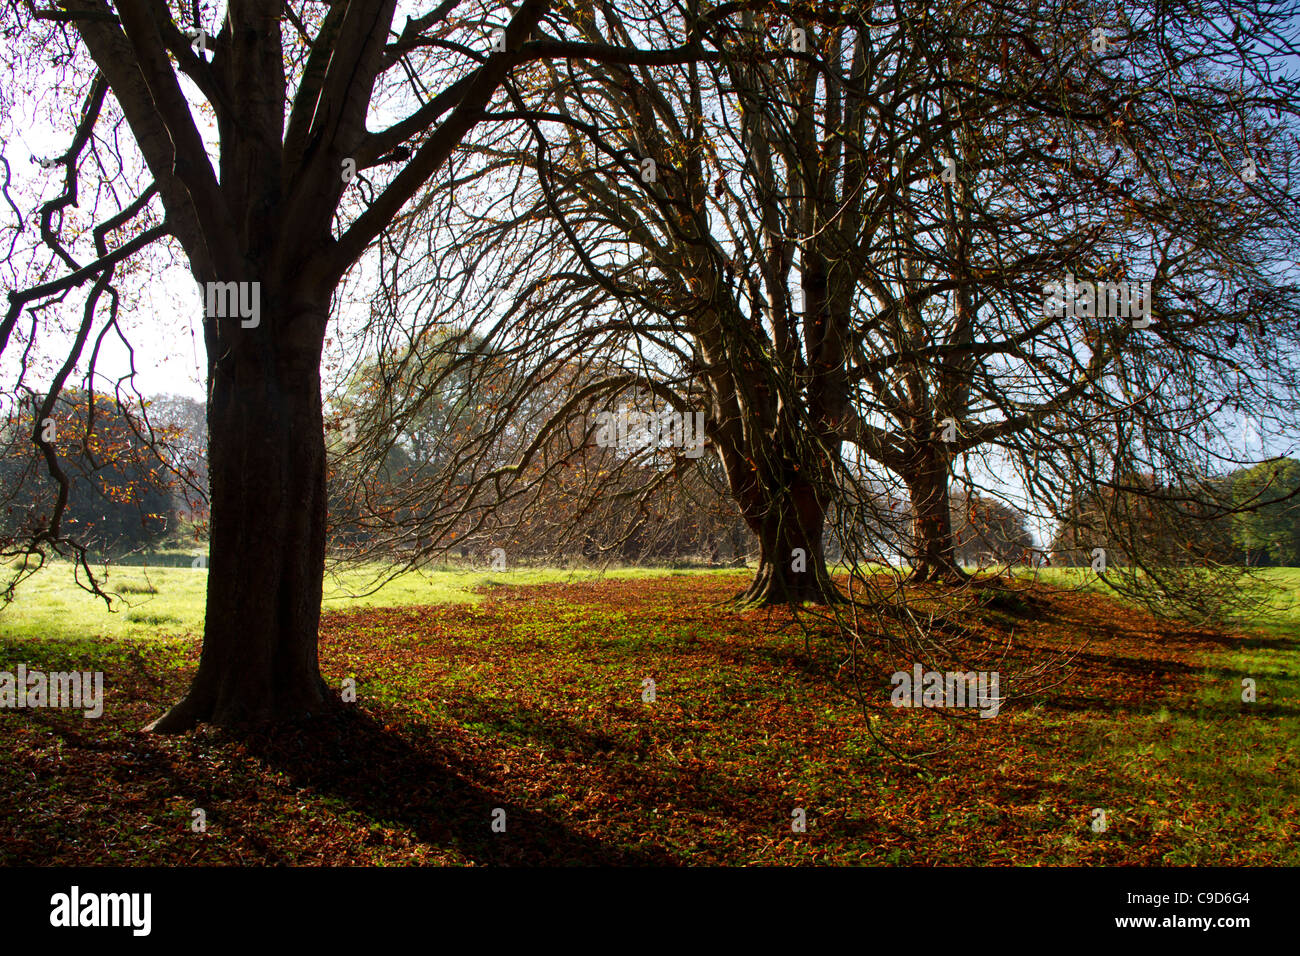 Line of Beech trees in autumn. Stock Photo